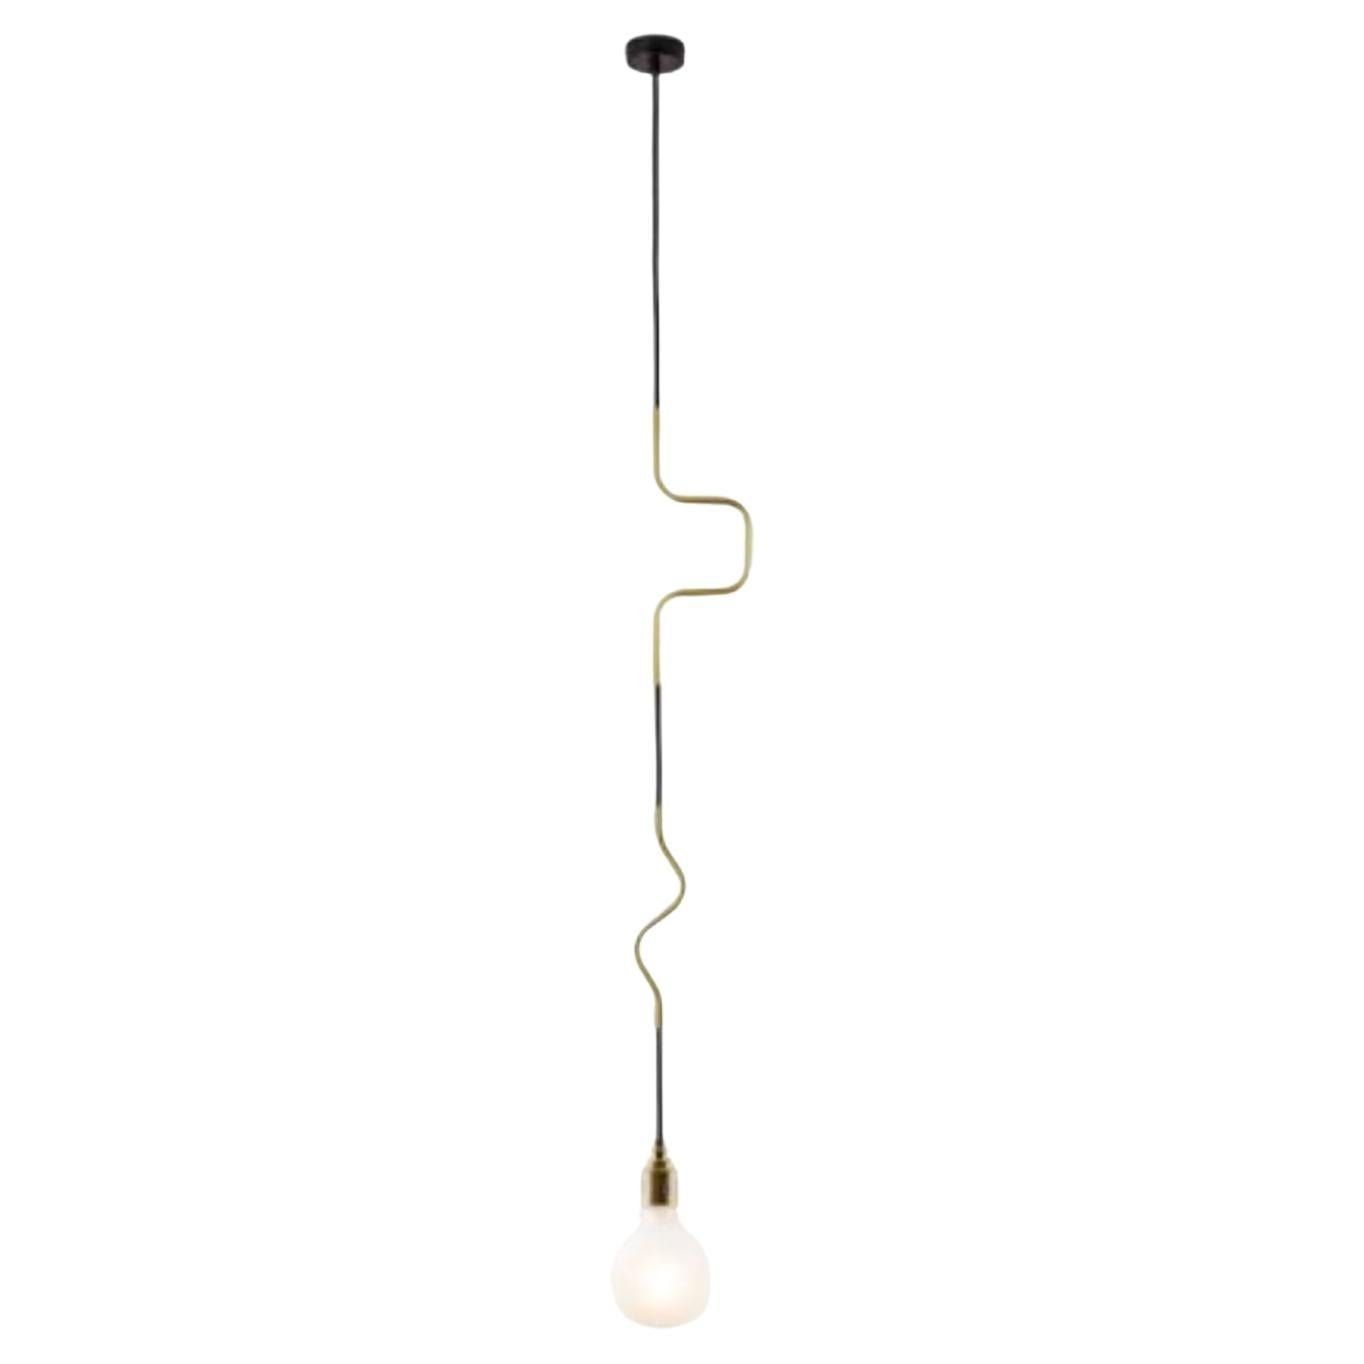 Set of 2 Jewellery single and double pendant lights by Volker Haug
Dimensions: 
Single: W 10 x H 30 cm 
Double: W 10 x H 60 cm 
Triple: W 10 x H 90 cm 
Materials: Aluminium ‘S’ or ‘U’ bends
Cord: Fabric braided
Minimum suspension: Single